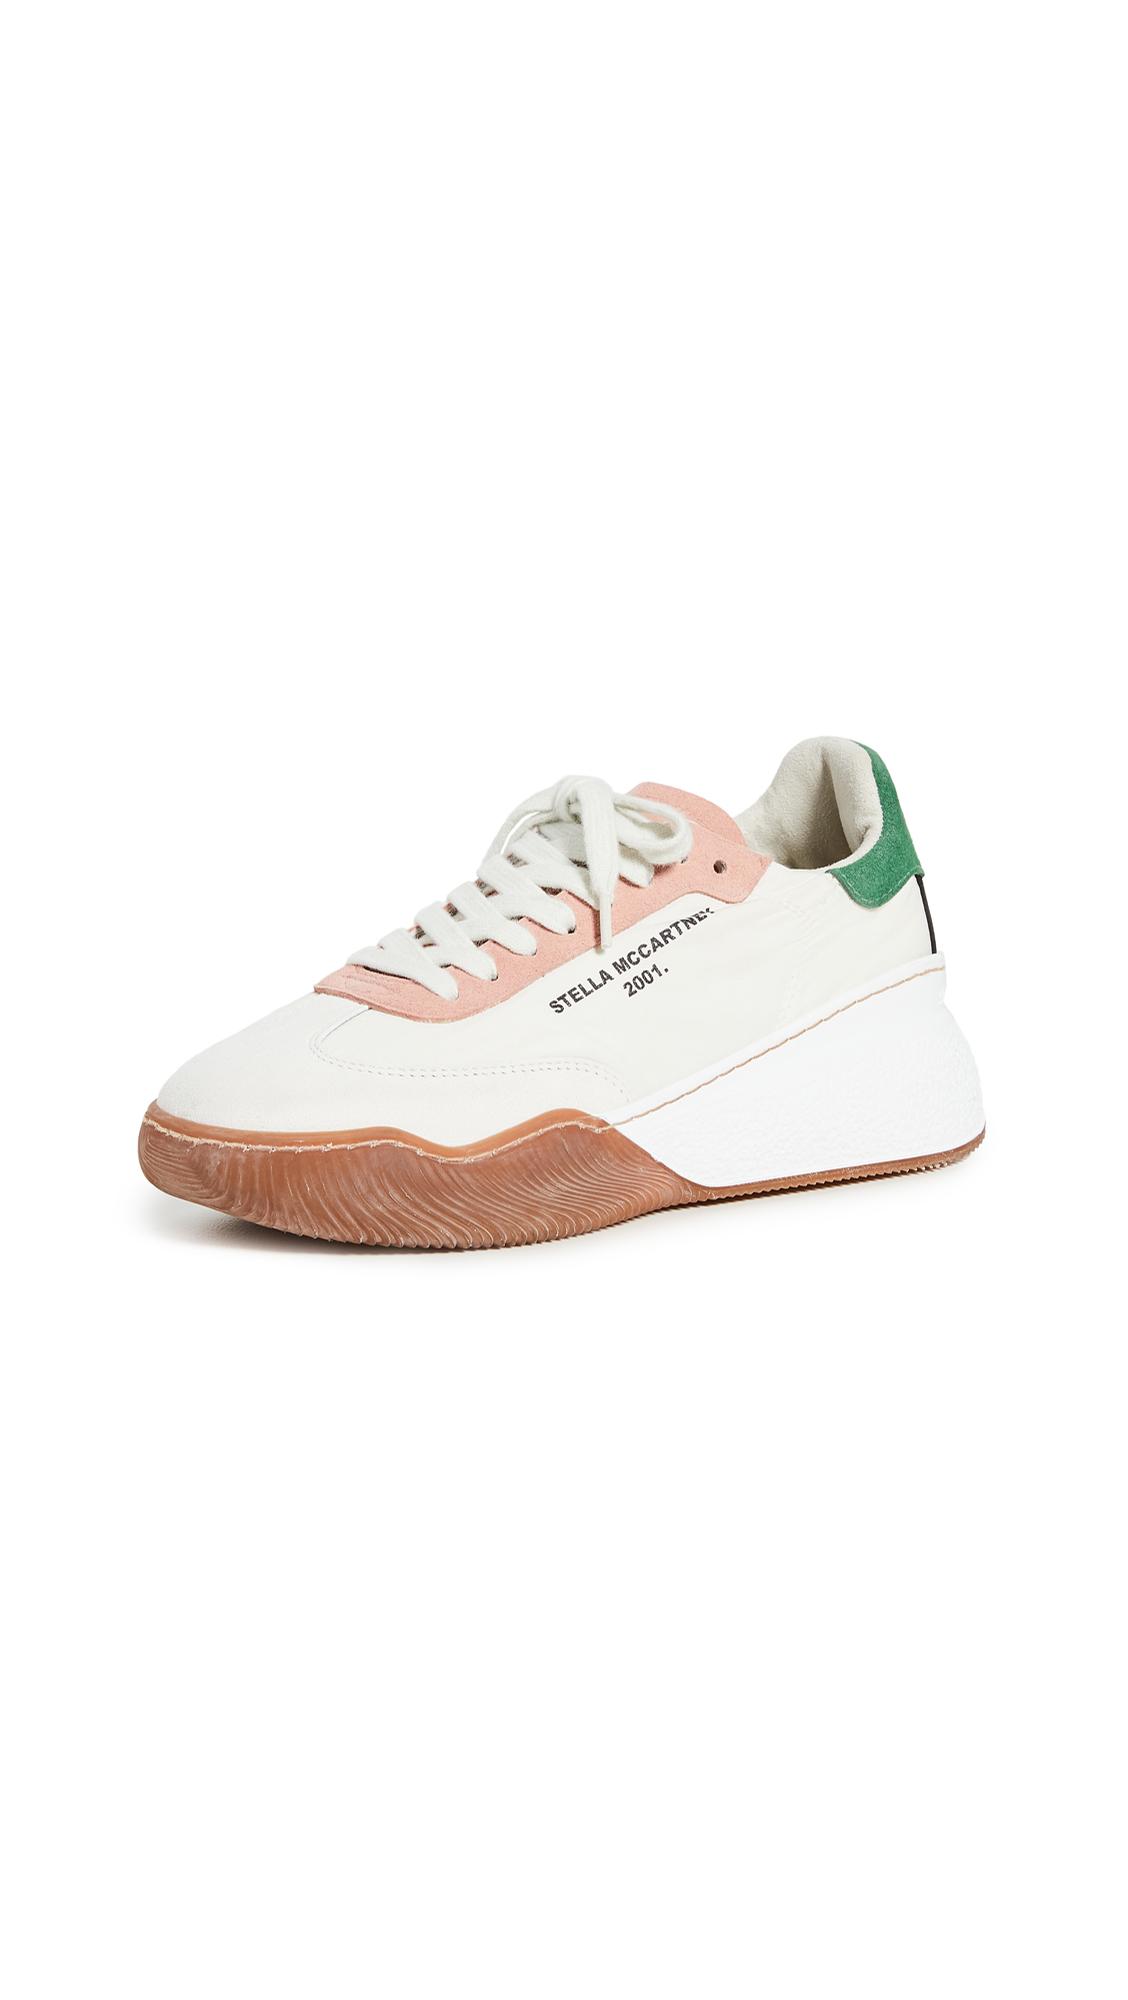 Stella McCartney Loop Lace Up Sneakers in White/Cream (White) - Lyst